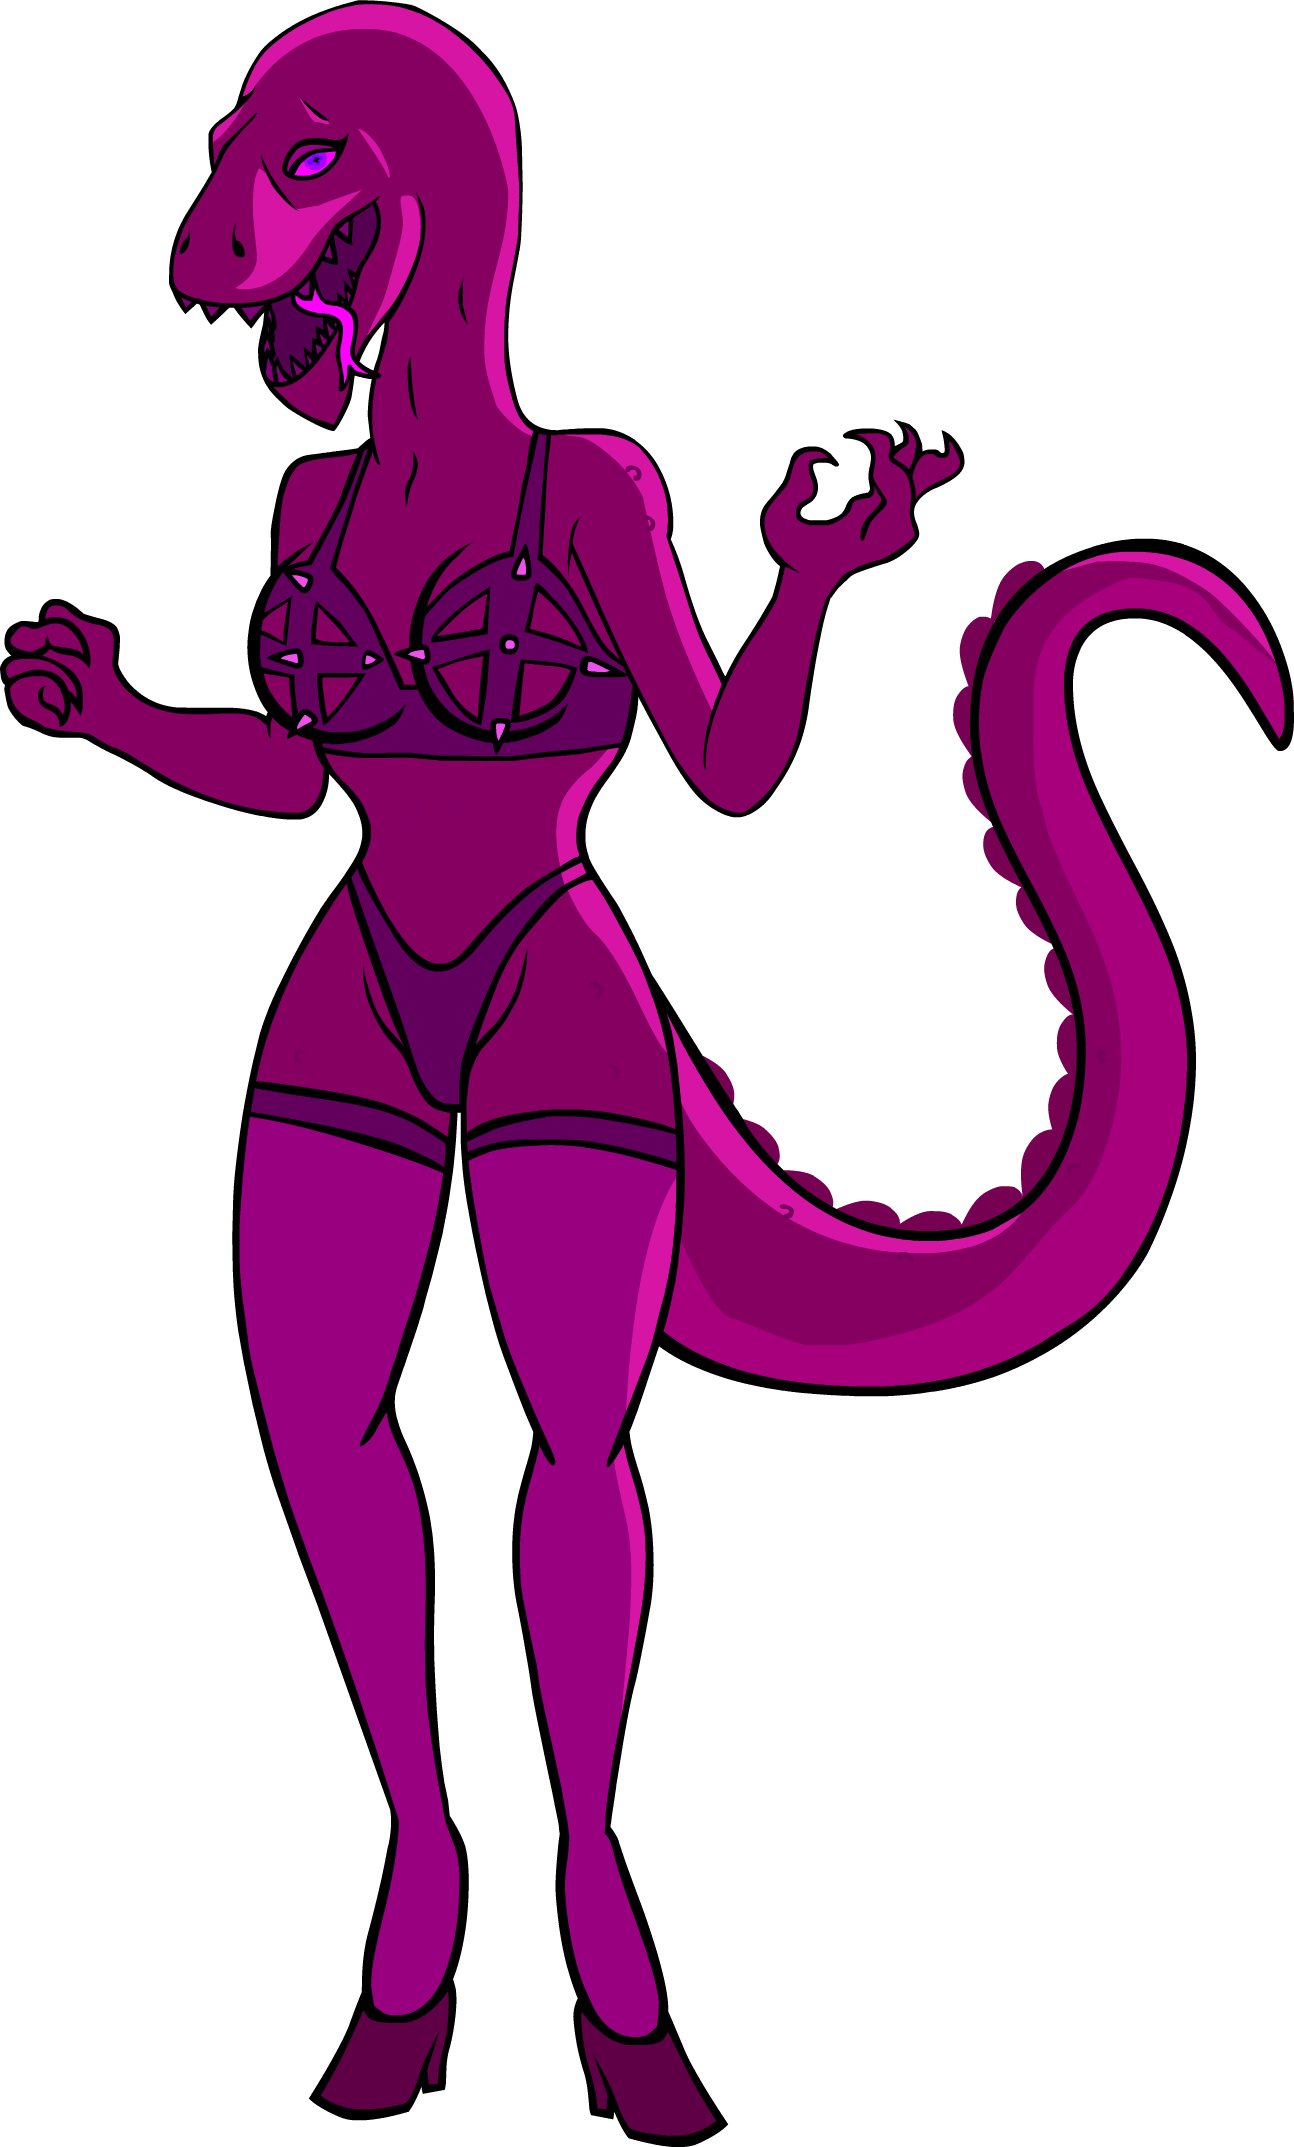 Alien Stripper Rick And Morty - Rick And Morty Pink Alien Stripper (1294x2147)